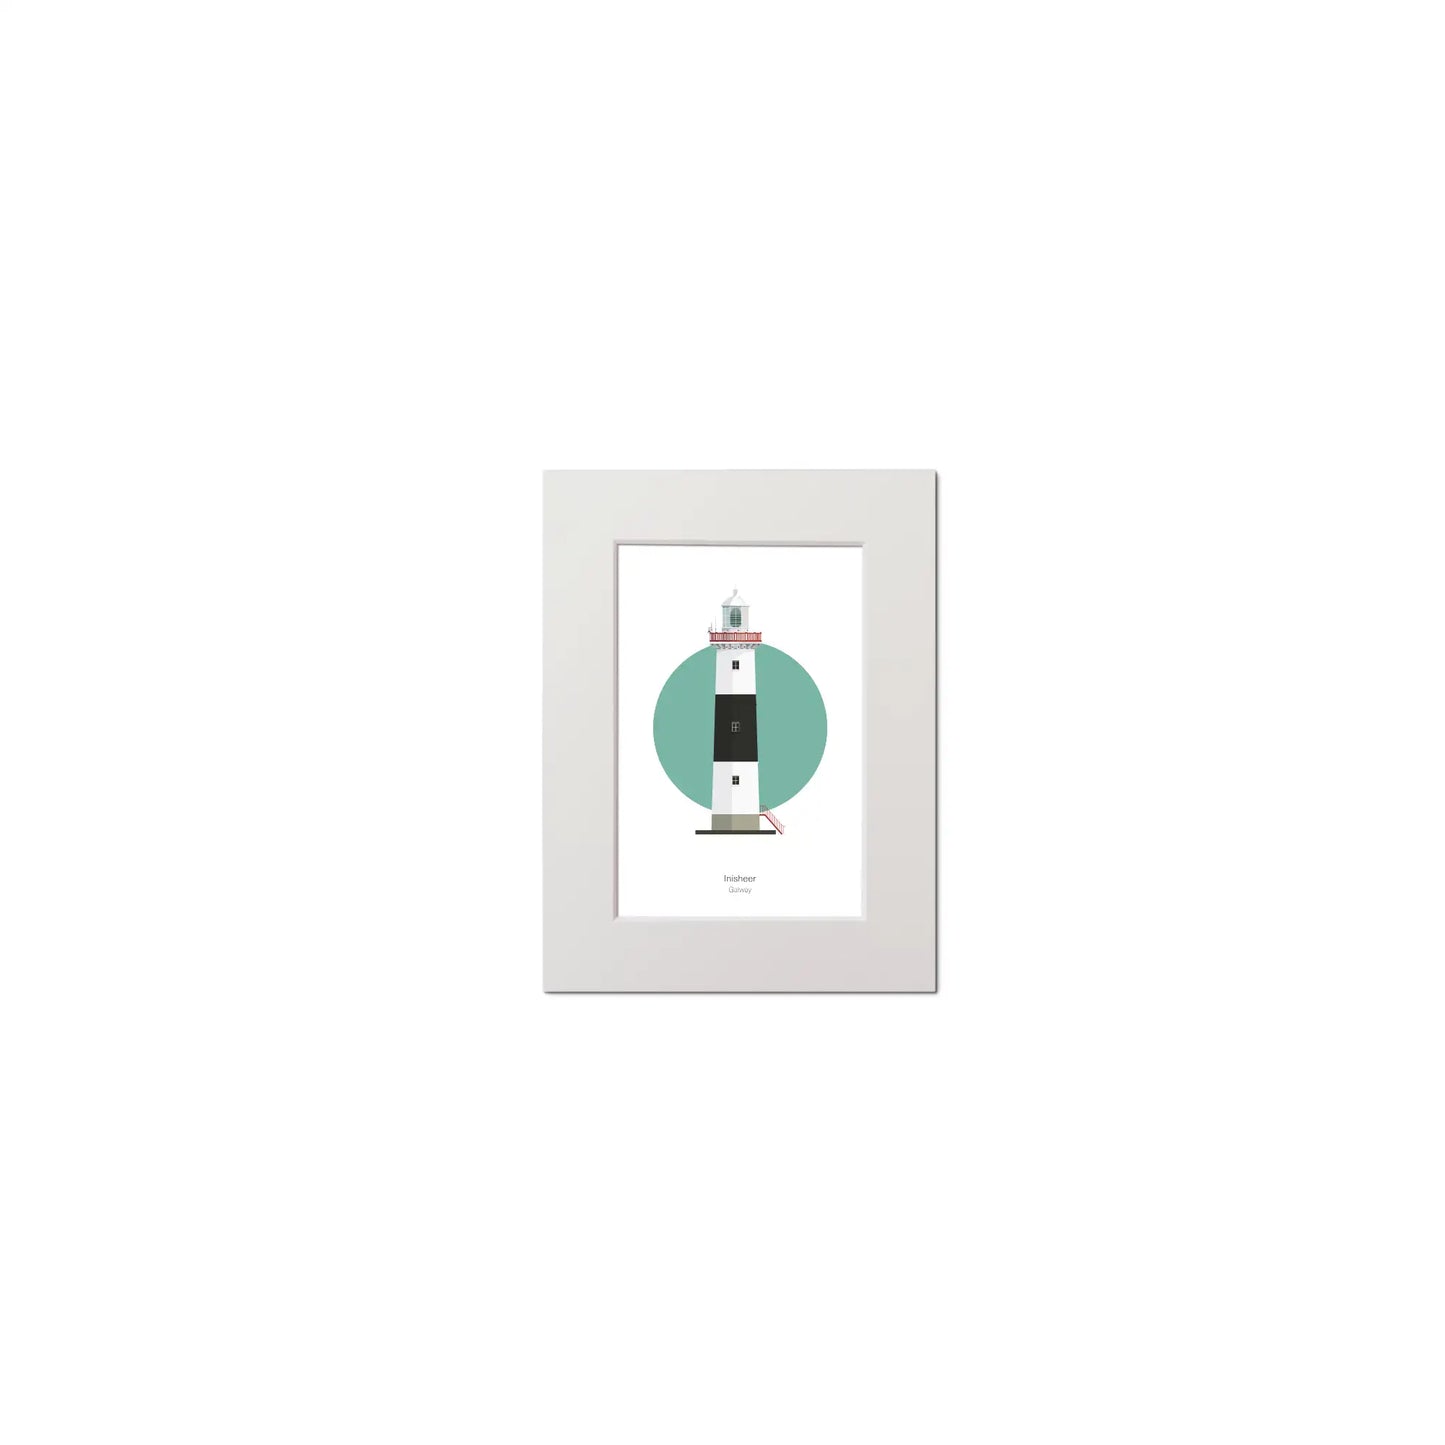 Contemporary graphic illustration of Inisheer lighthouse on a white background inside light blue square, mounted and measuring 15x20cm.